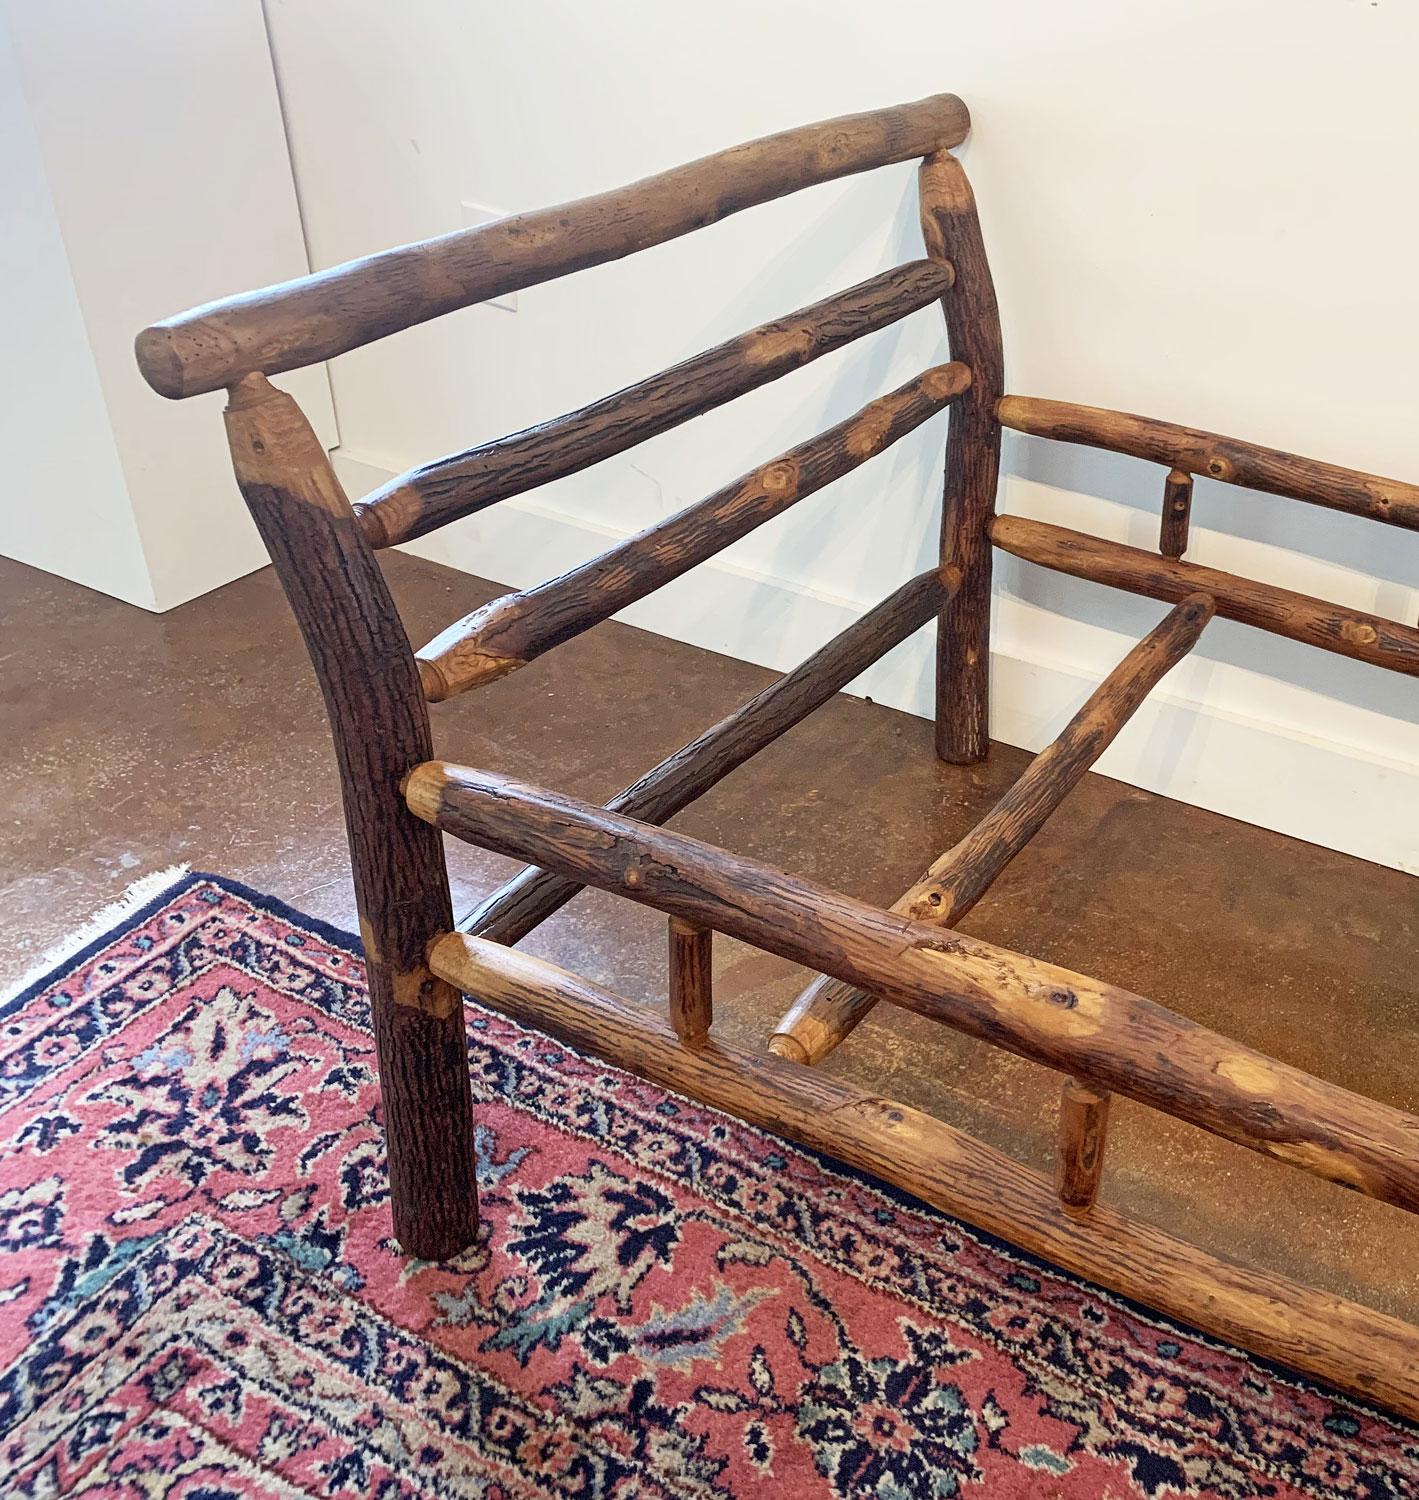 This handsome hickory pole daybed has flared ends and spindled side rails. When topped with a thick piece of foam and pillows (as shown in final photos, not included) it makes a nice sitting bench or cot as a stylish addition to a room’s furniture